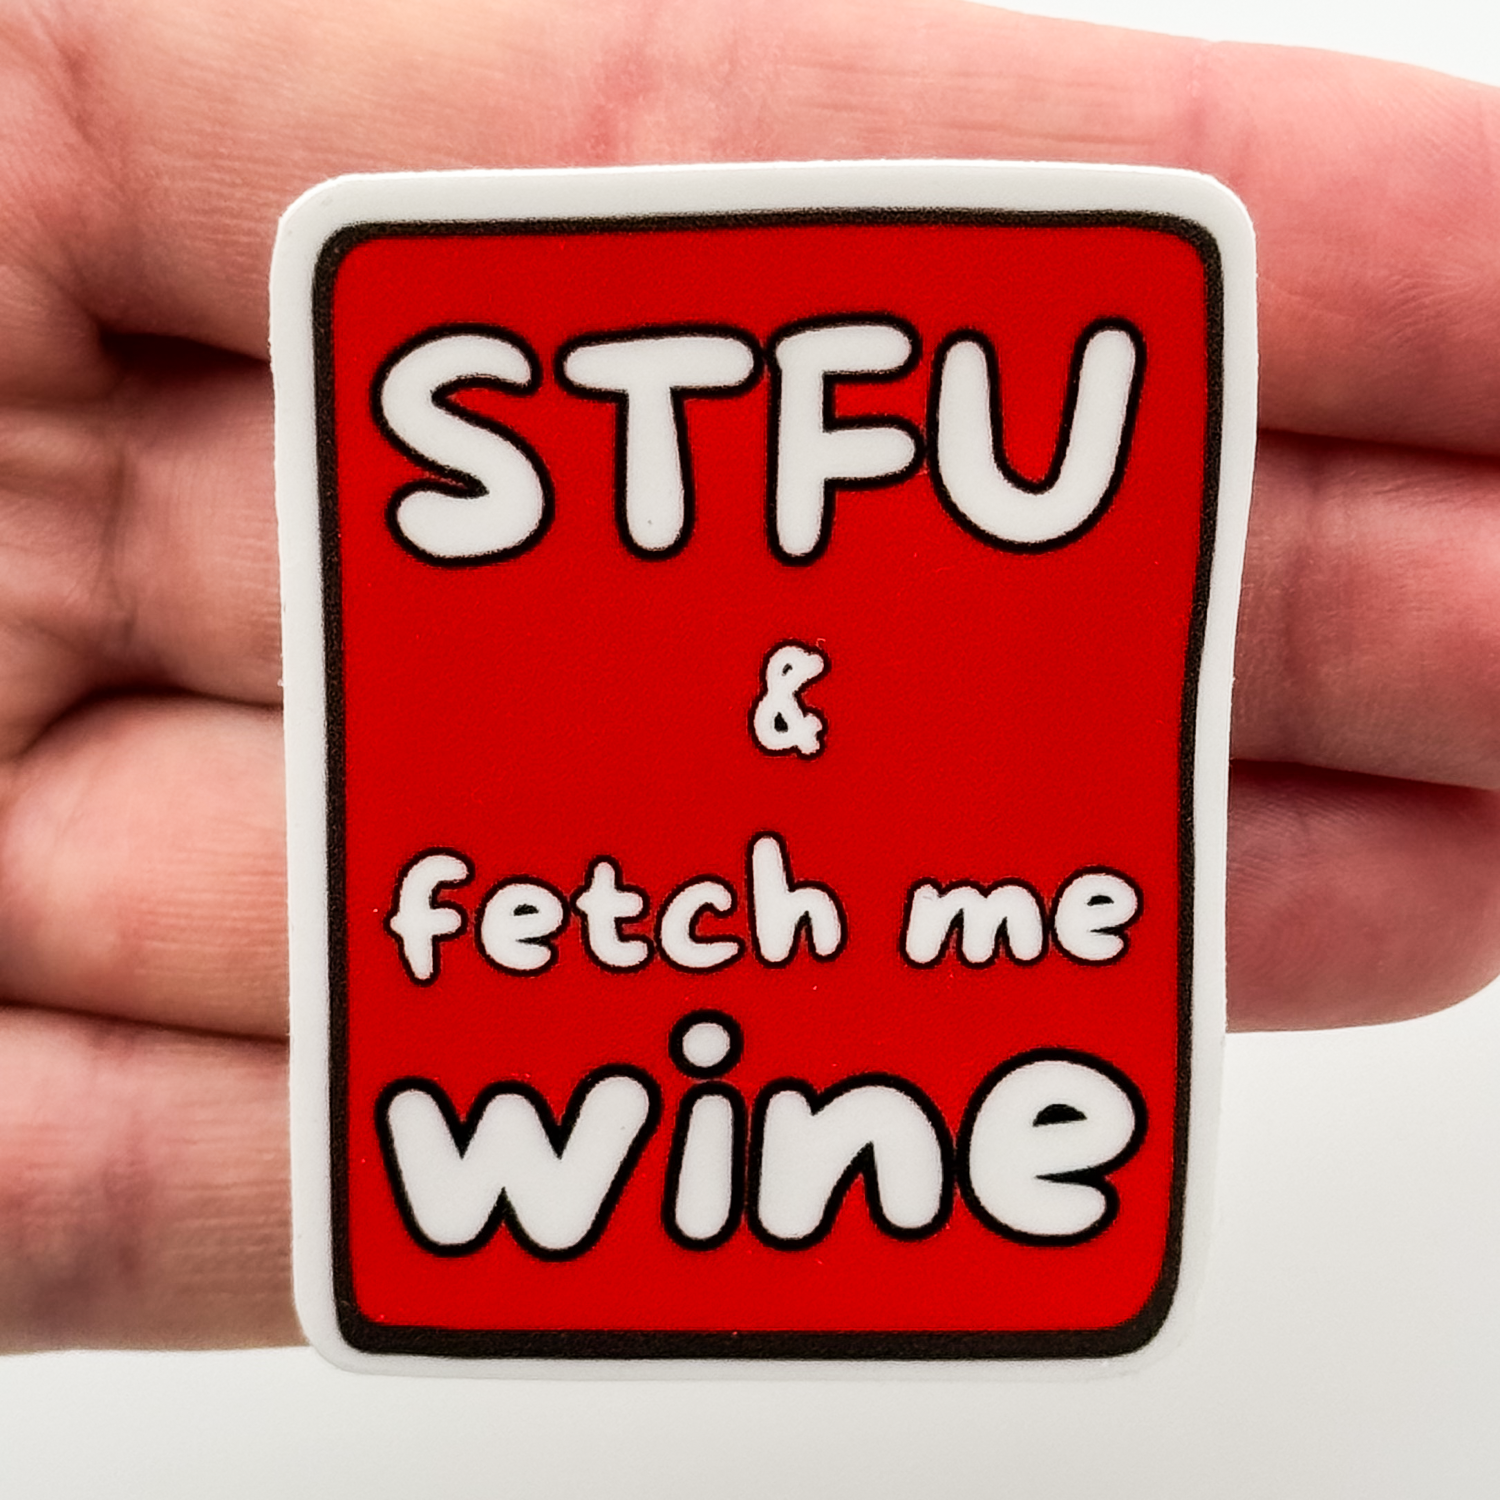 funny sassy sticker: red rectangle with white and black letters "STFU & fetch me wine"